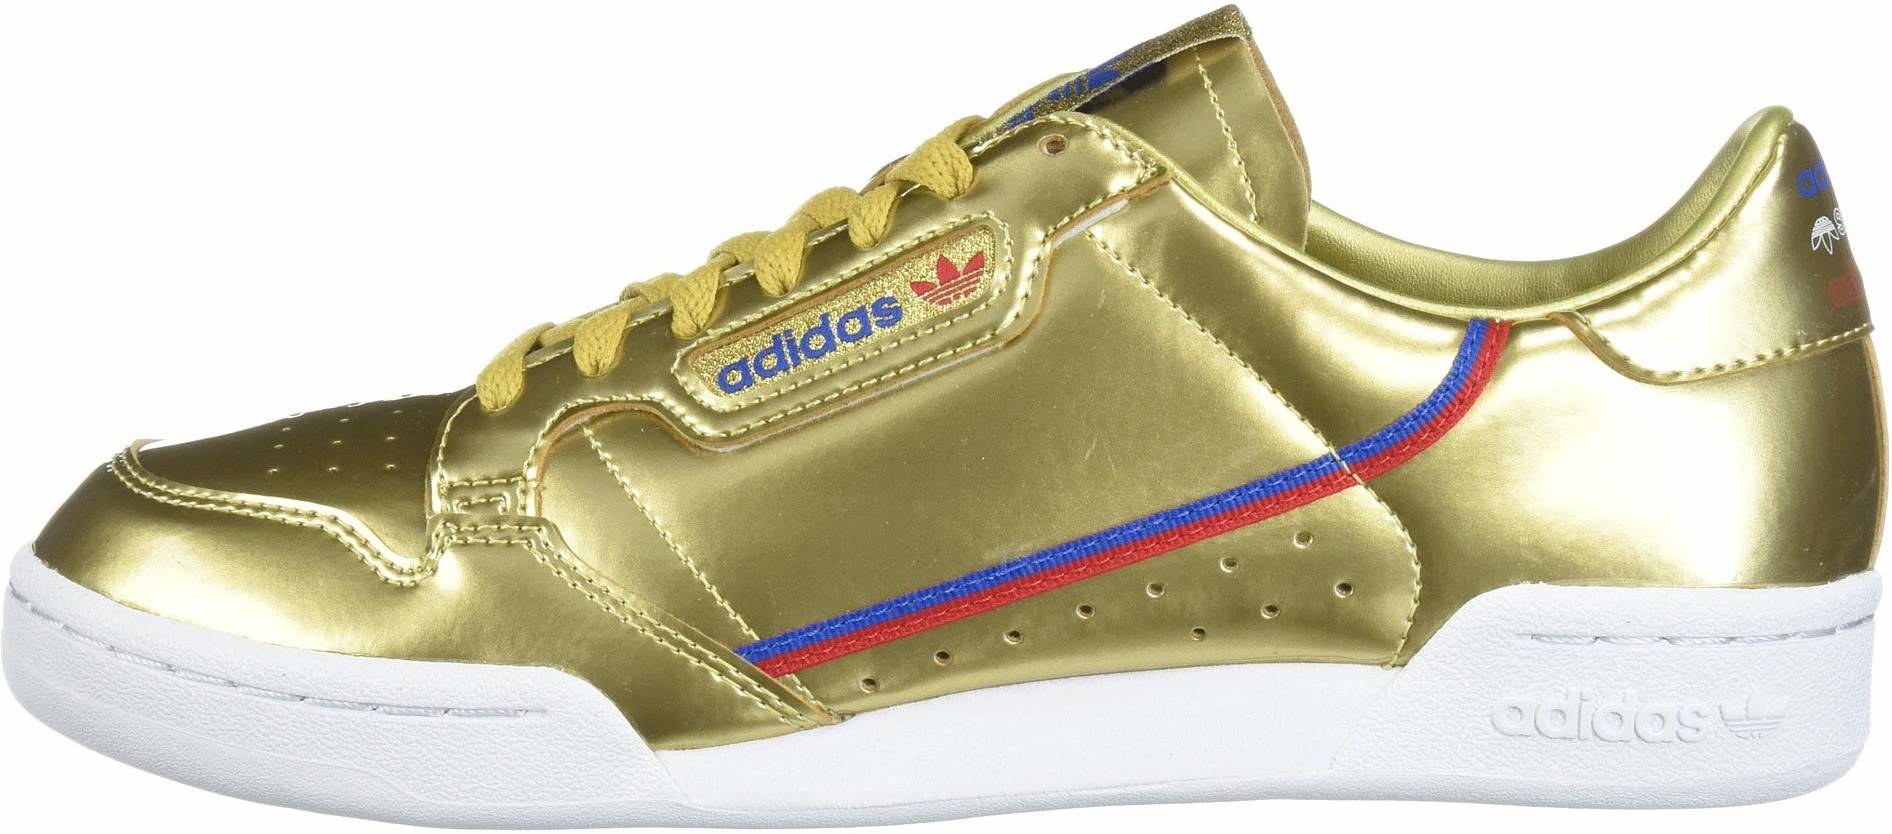 spirit One sentence hedge 8 Gold Adidas sneakers: Save up to 51% | RunRepeat